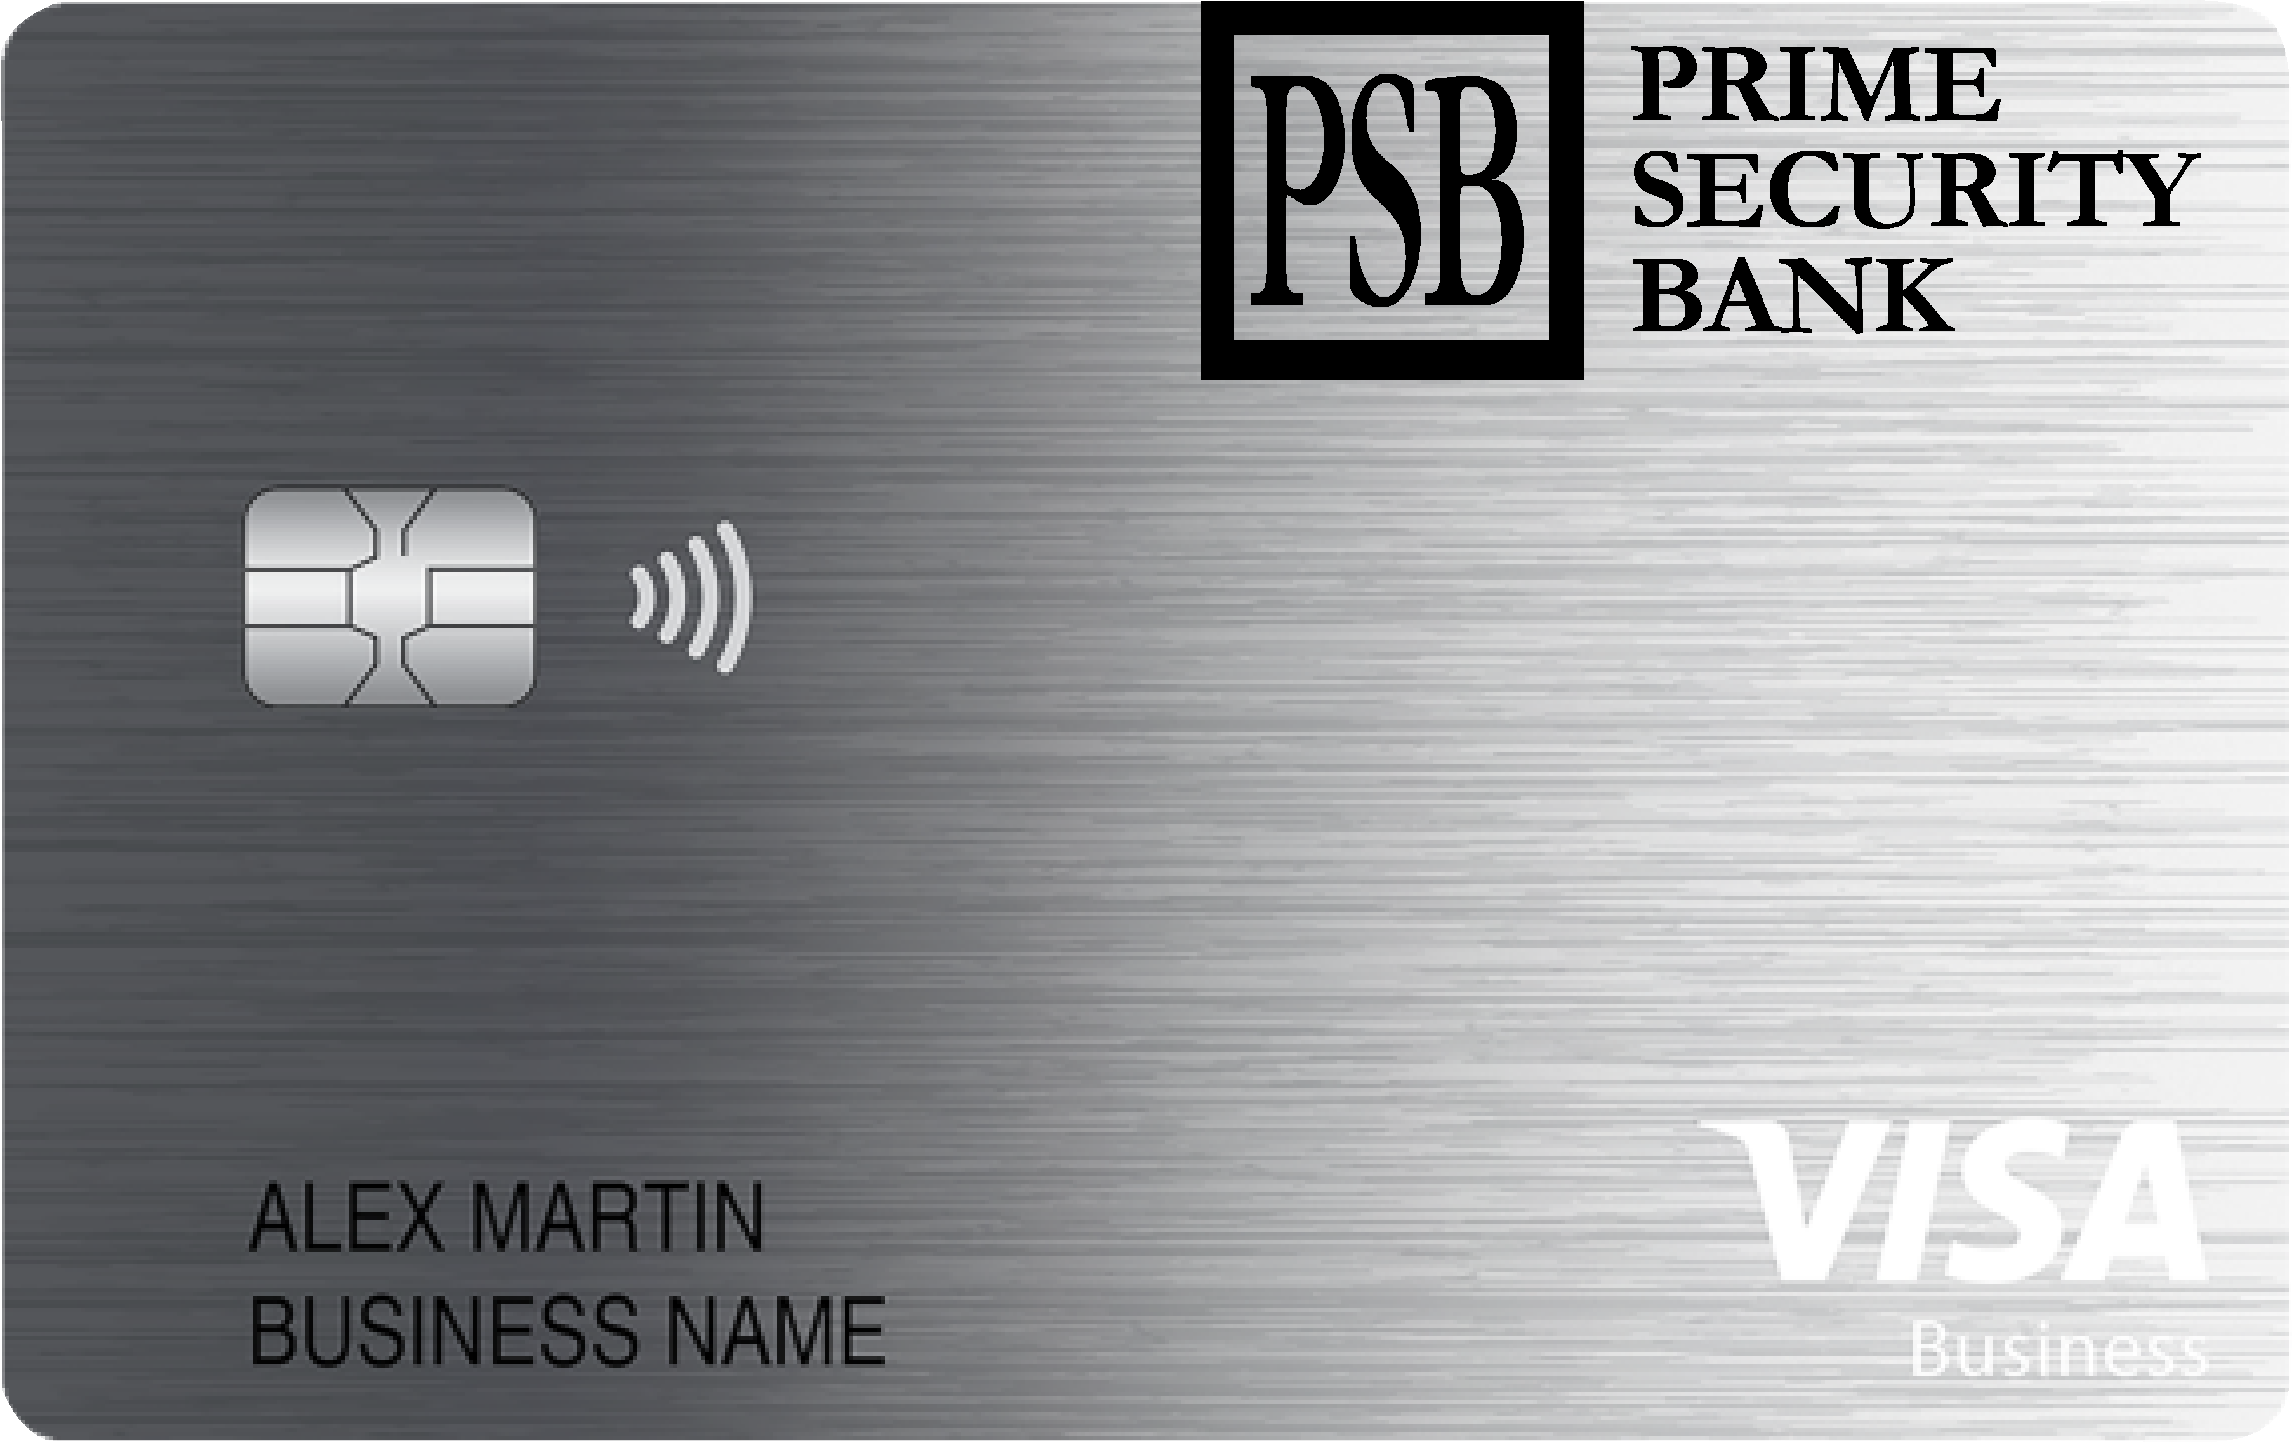 PRIME SECURITY BANK